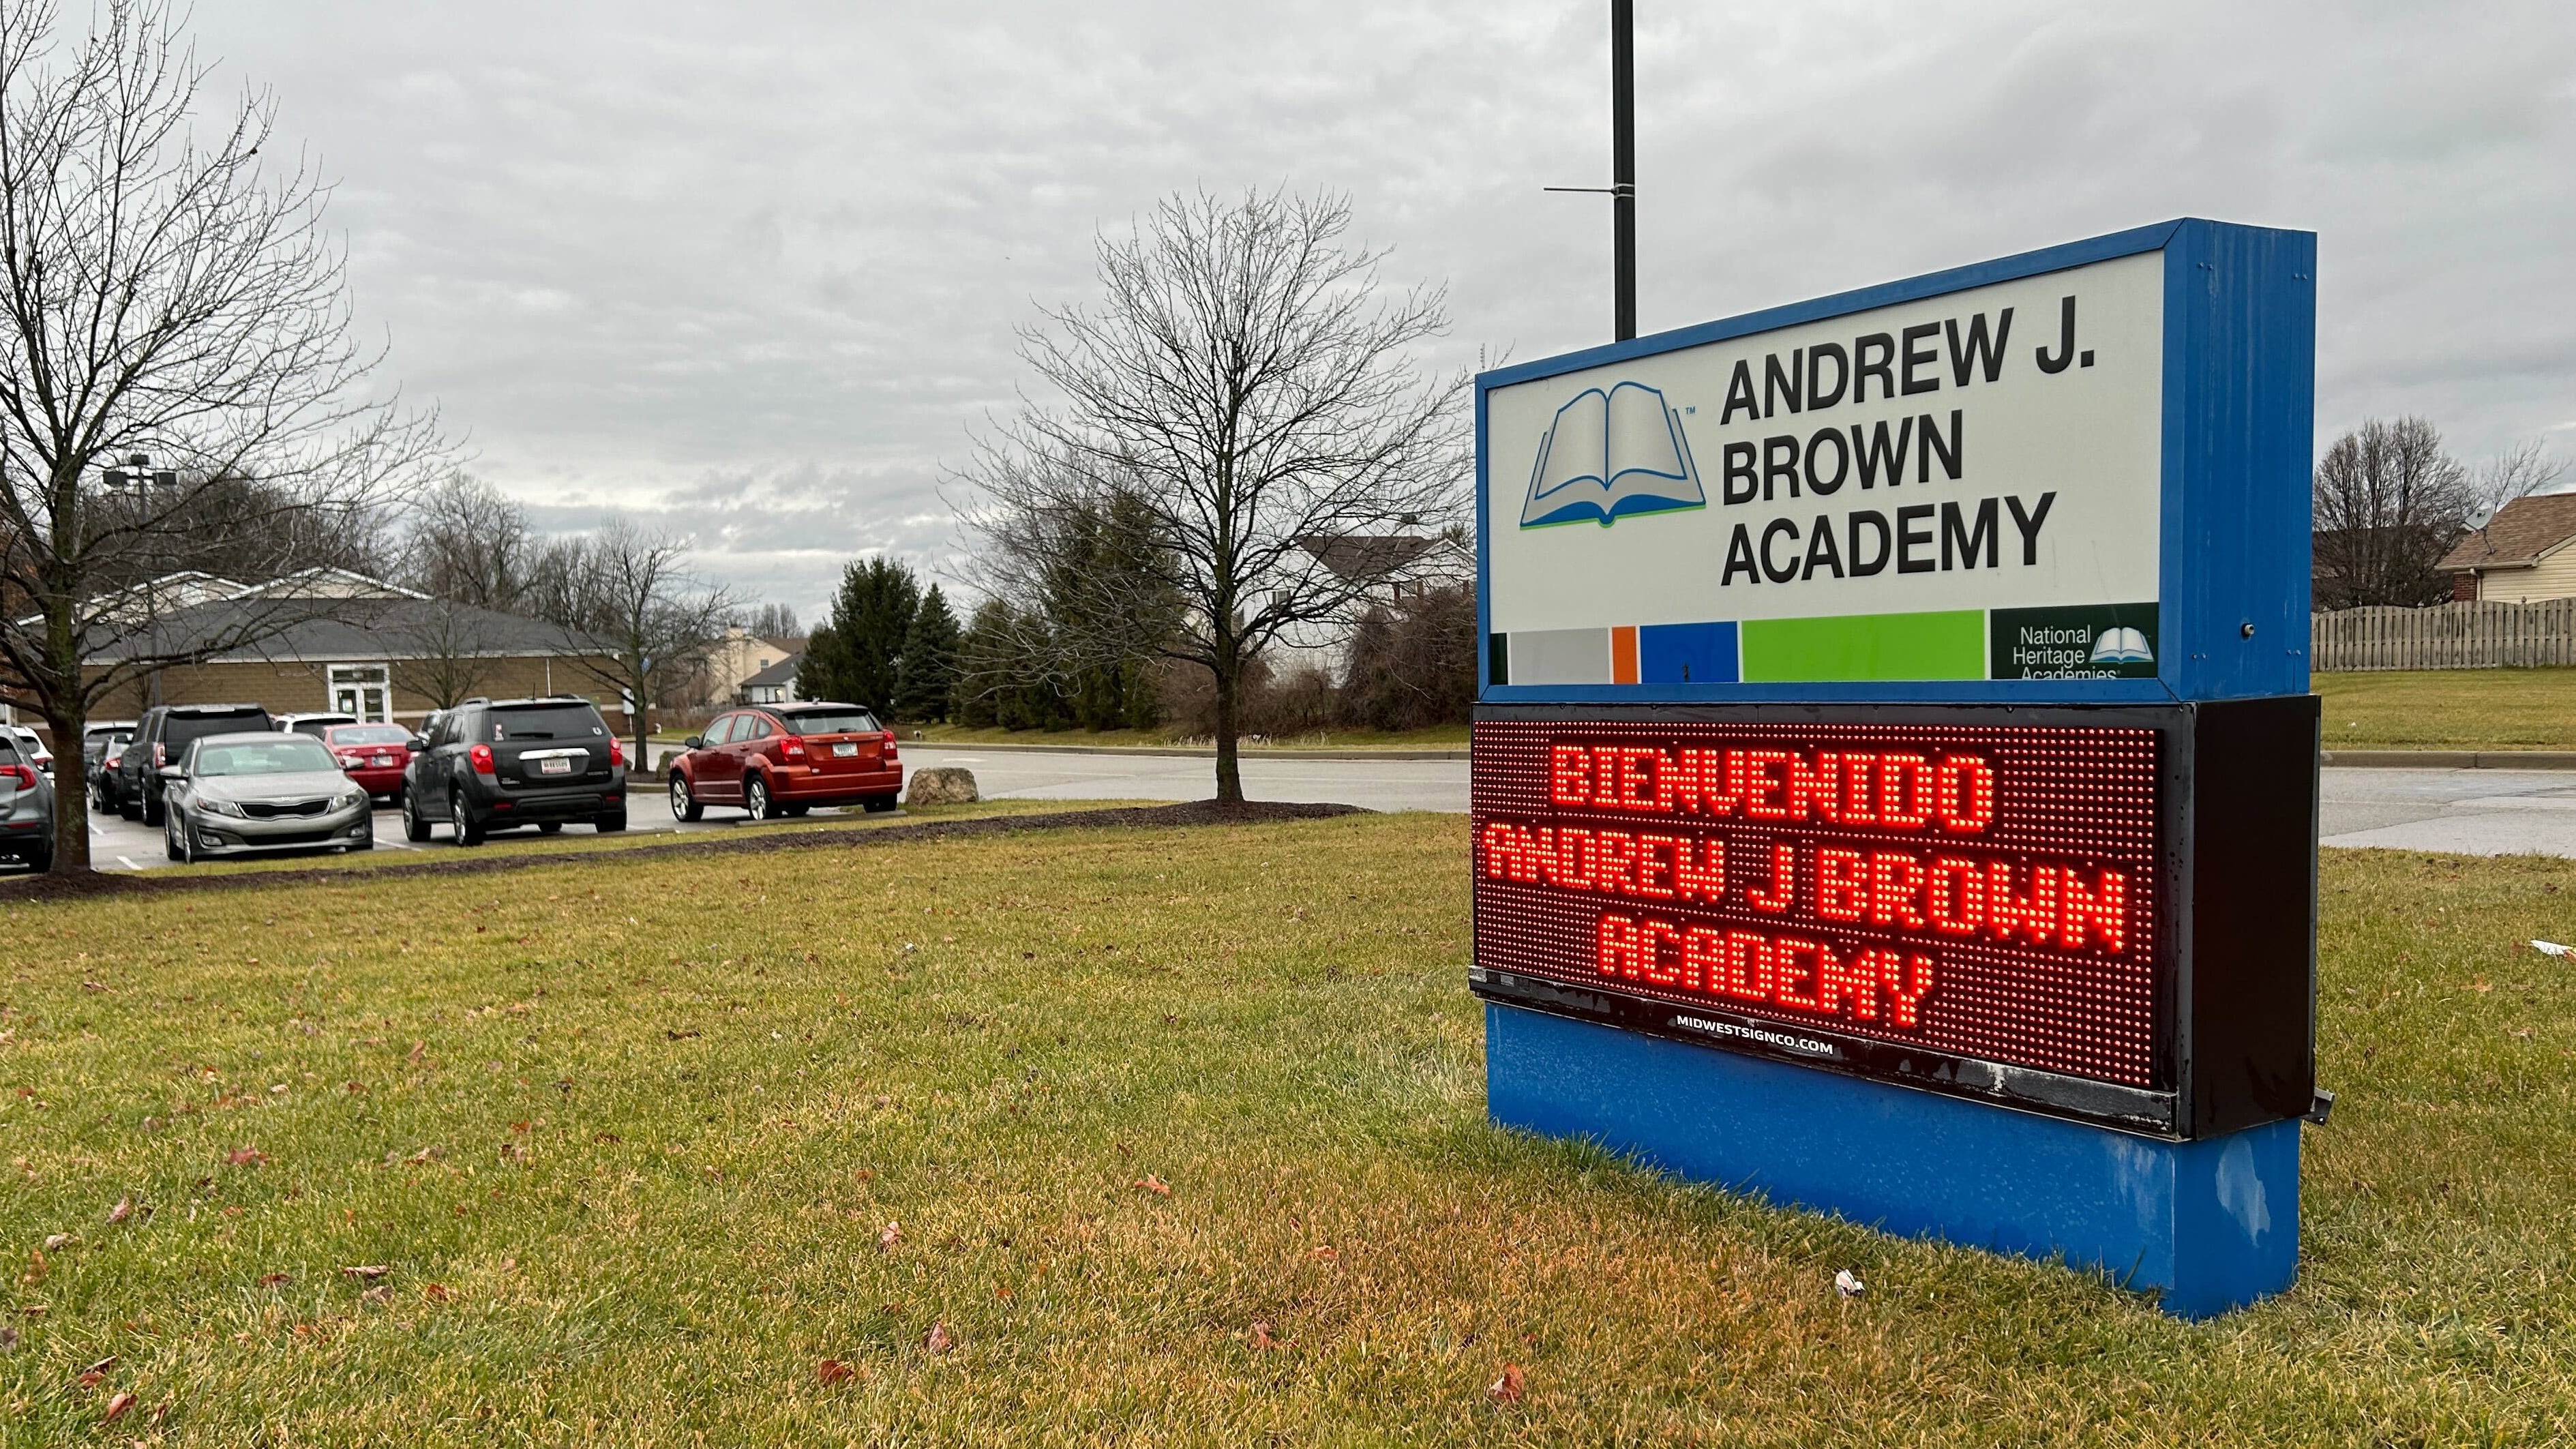 A sign that reads "Andrew J. Brown Academy" and "Bienvenidos Andrew J. Brown Academy," sits on a green lawn with cars and grey sky in the background.